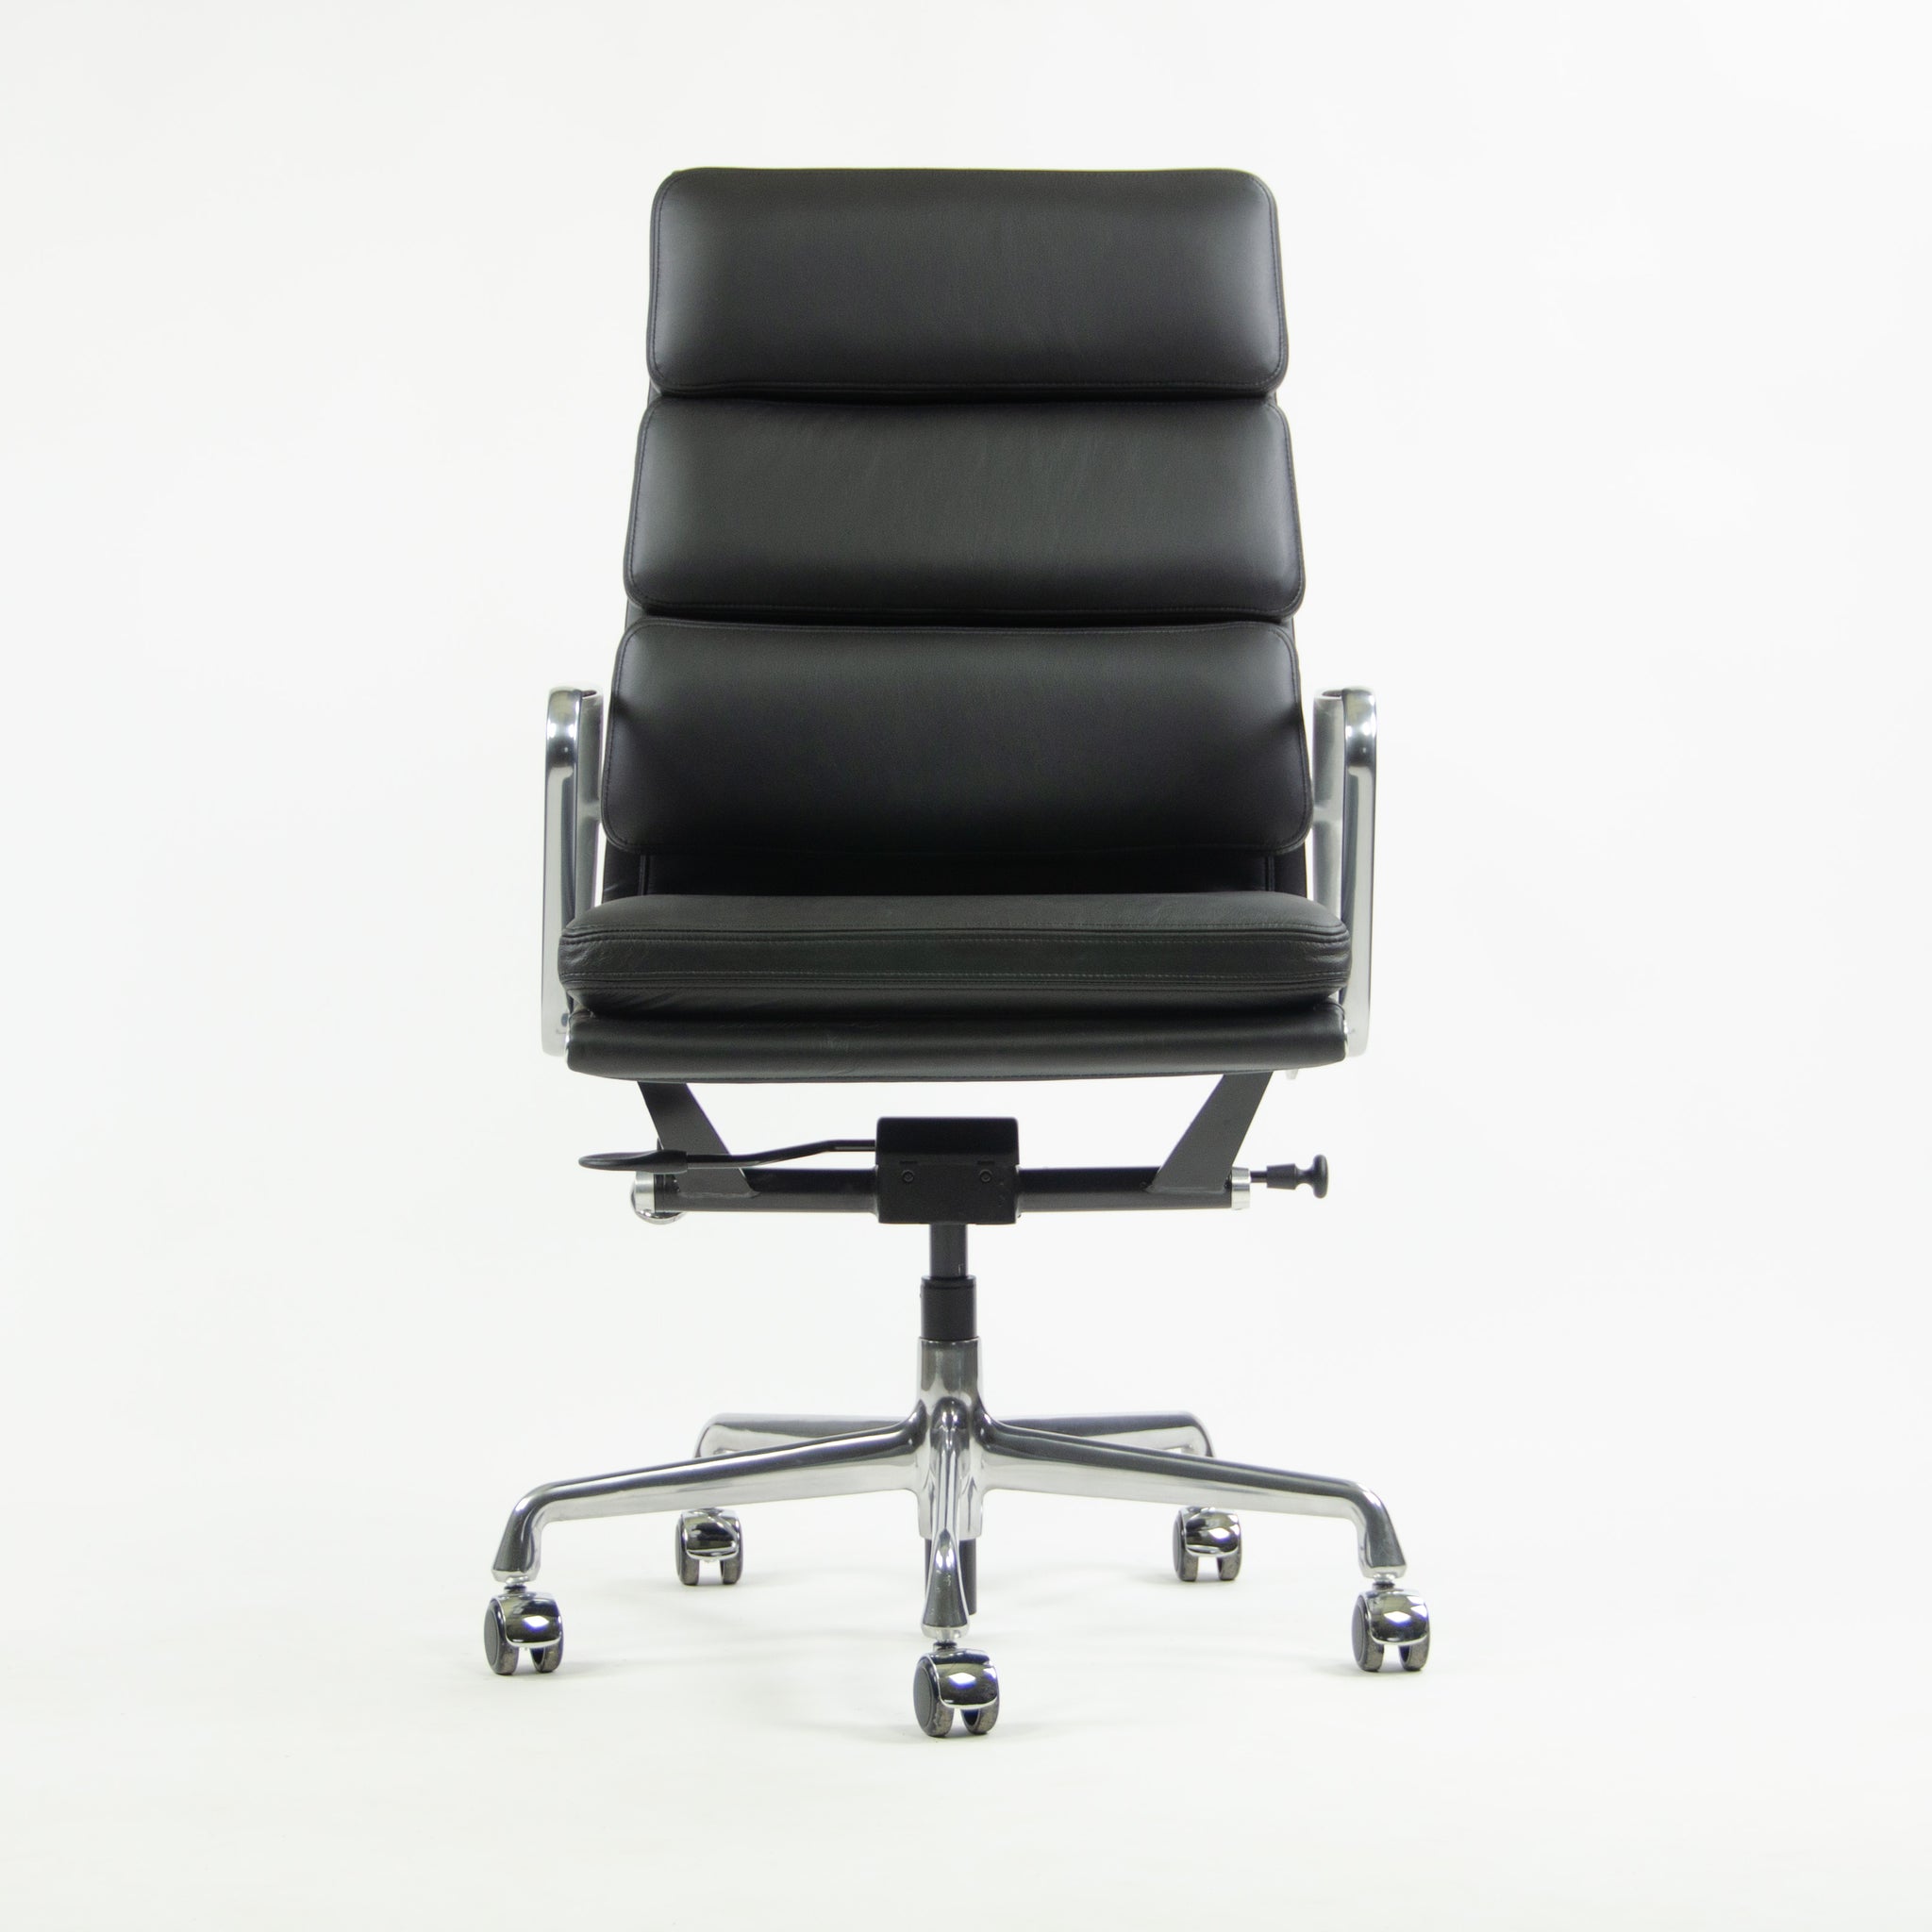 SOLD Brand New 2017 Eames Herman Miller High Soft Pad Aluminum Desk Chair Black Leather